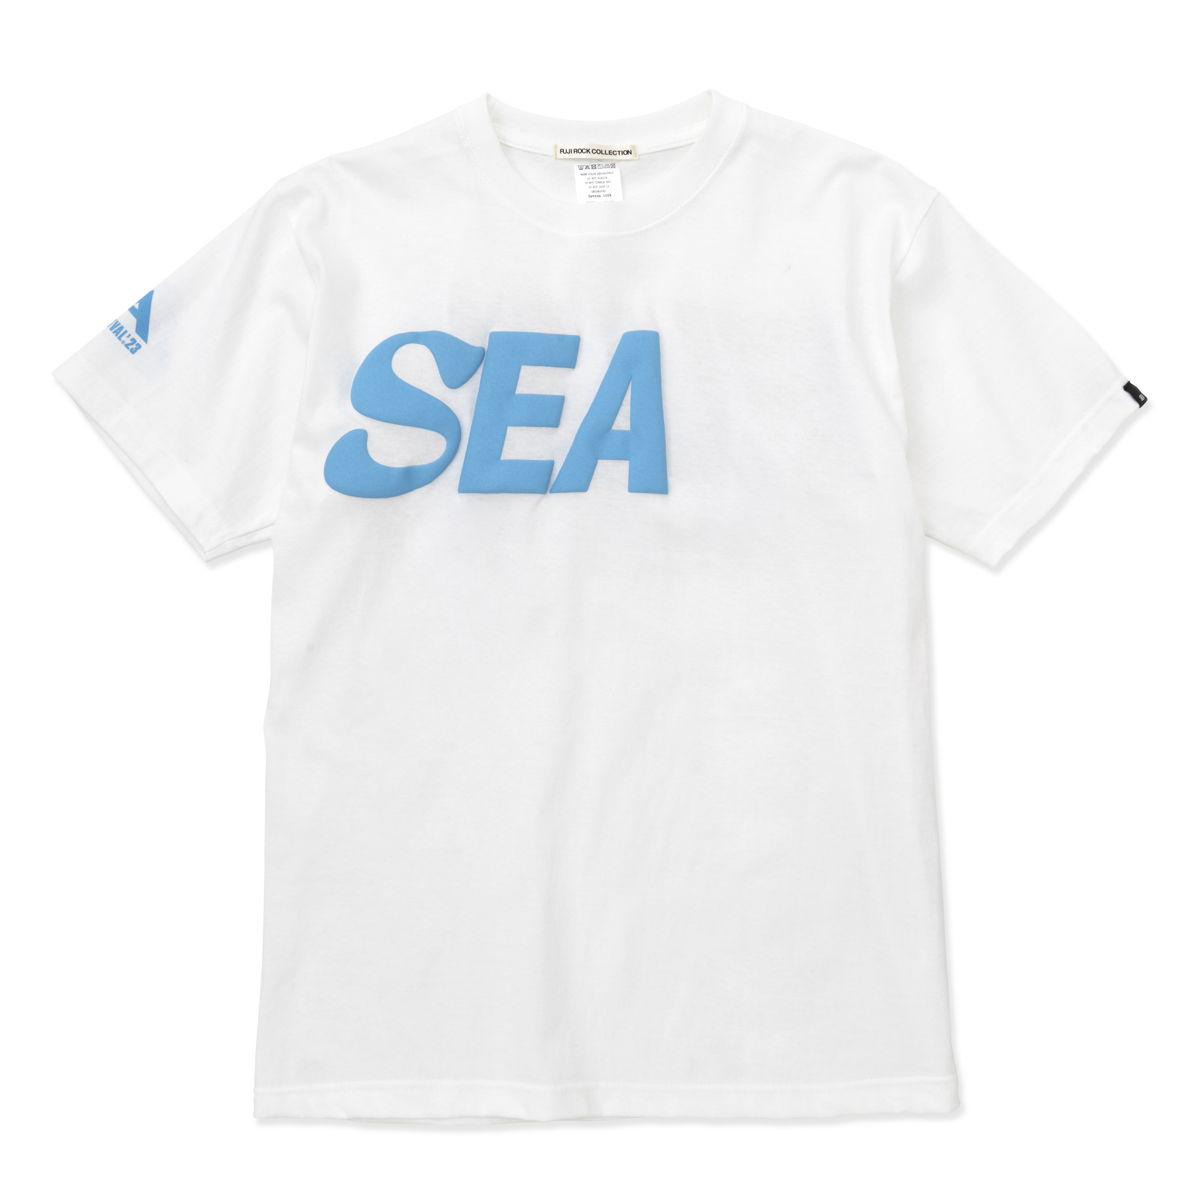 WIND AND SEA FAS S/S TEE WHITE